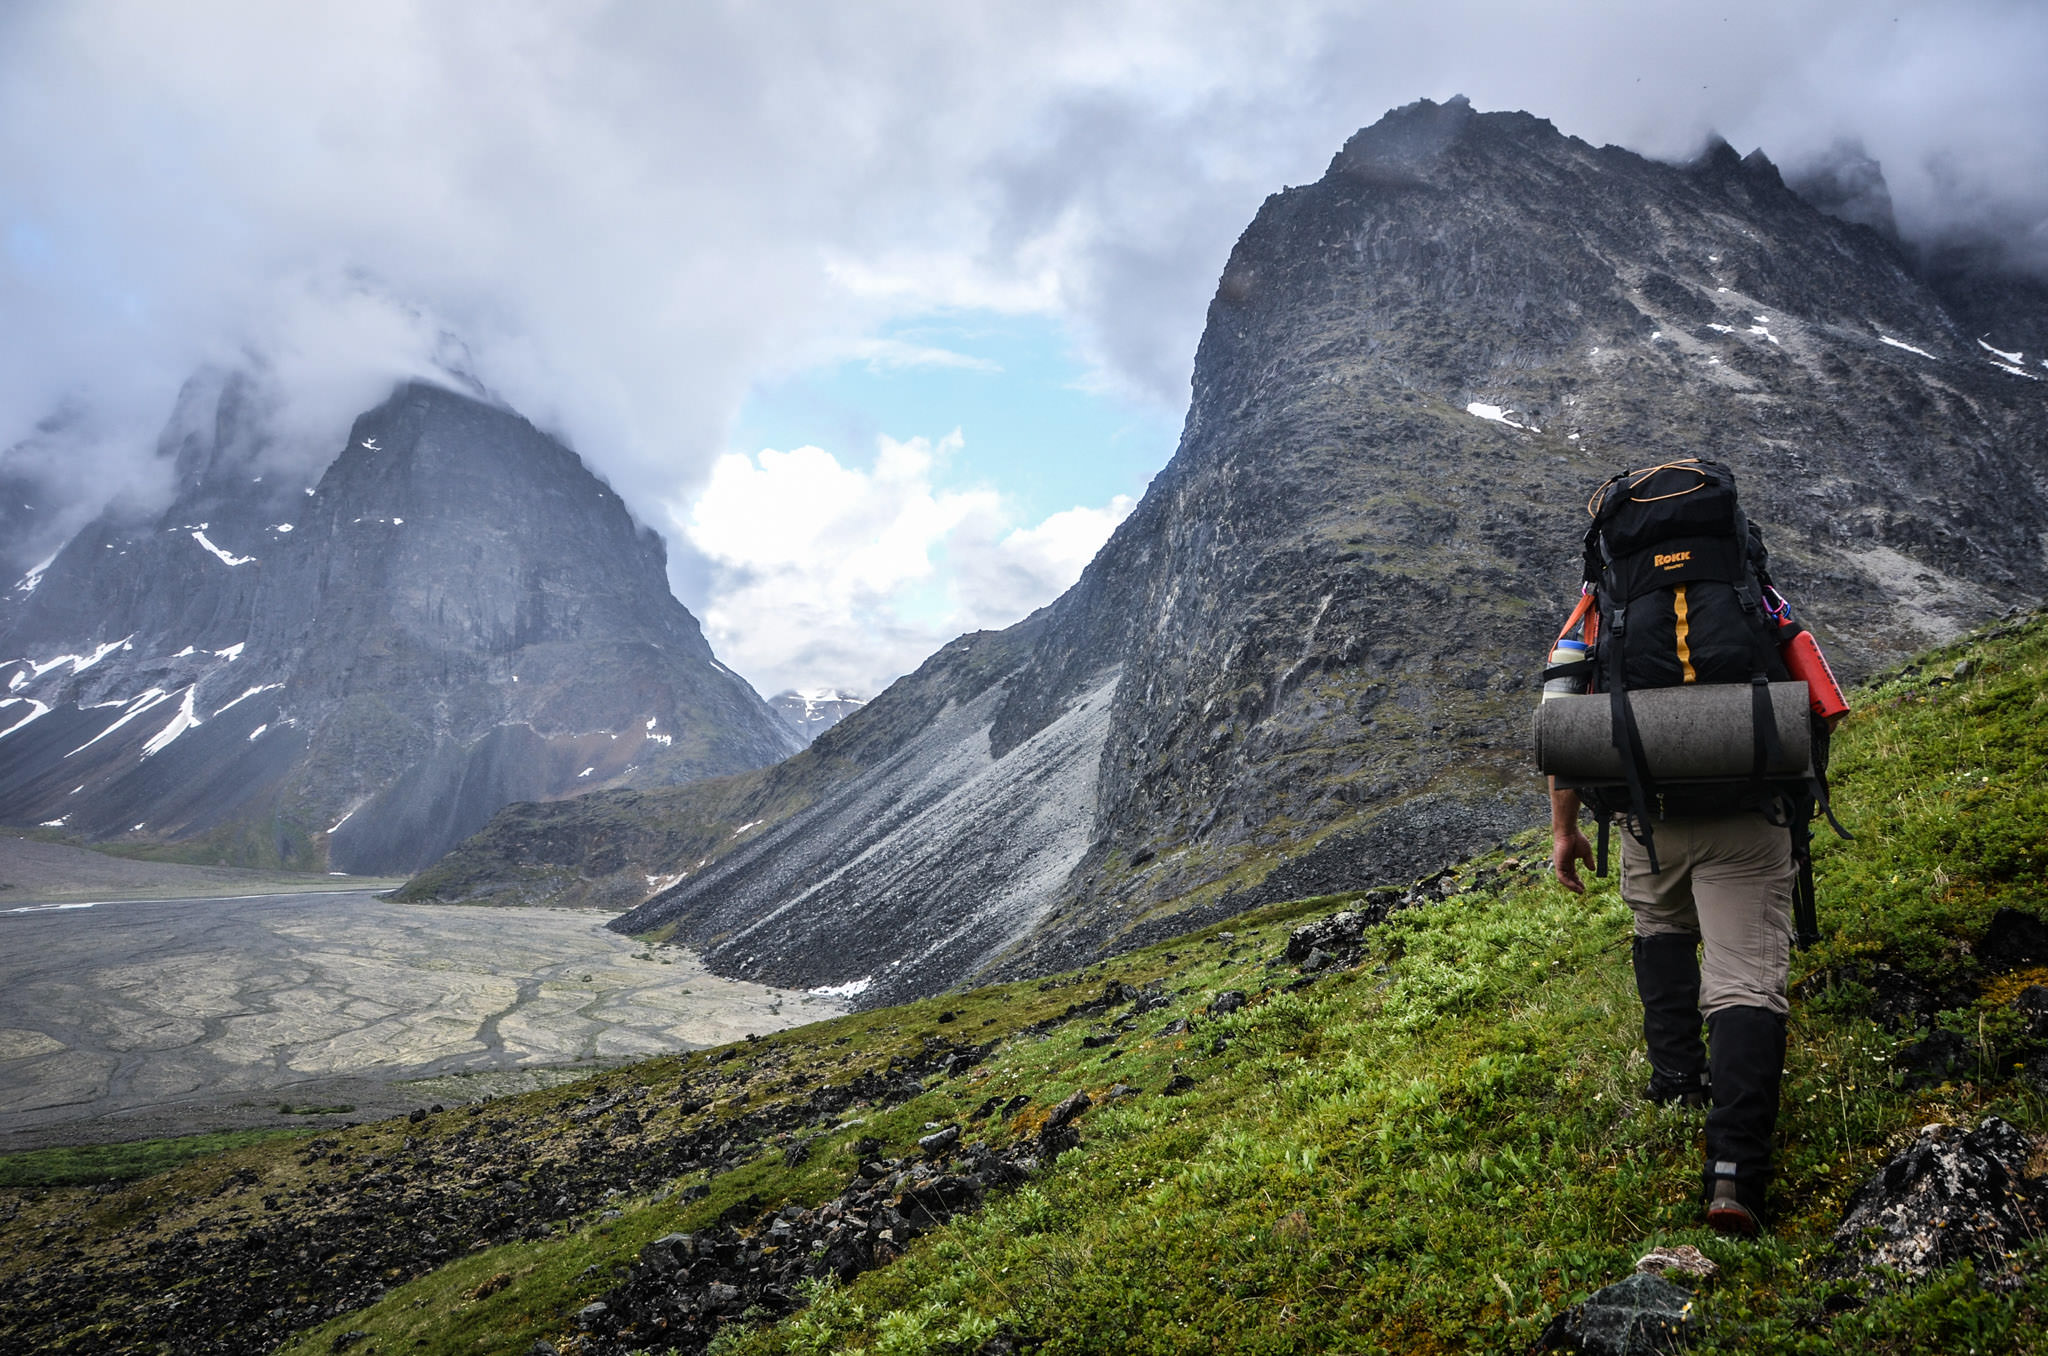 Now through July 2nd, enter the Travel Channel Alaskan Adventure Sweepstakes daily for your chance to win $10,000!